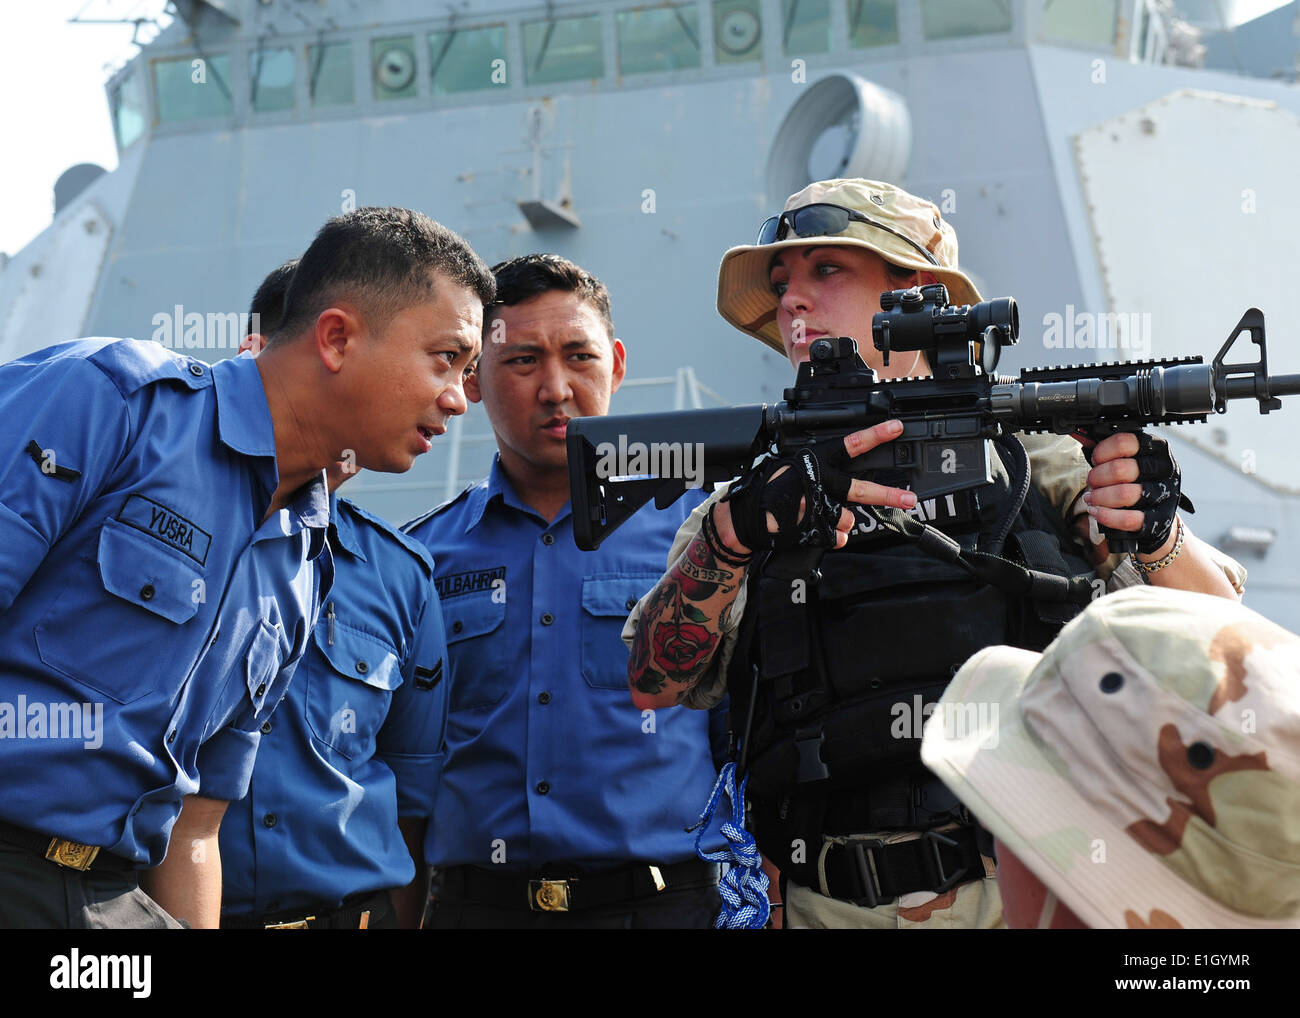 U.S. Navy Fire Controlman 2nd Class Christi Hoopes asks a Royal Brunei Navy boarding team member to look through the sight of h Stock Photo